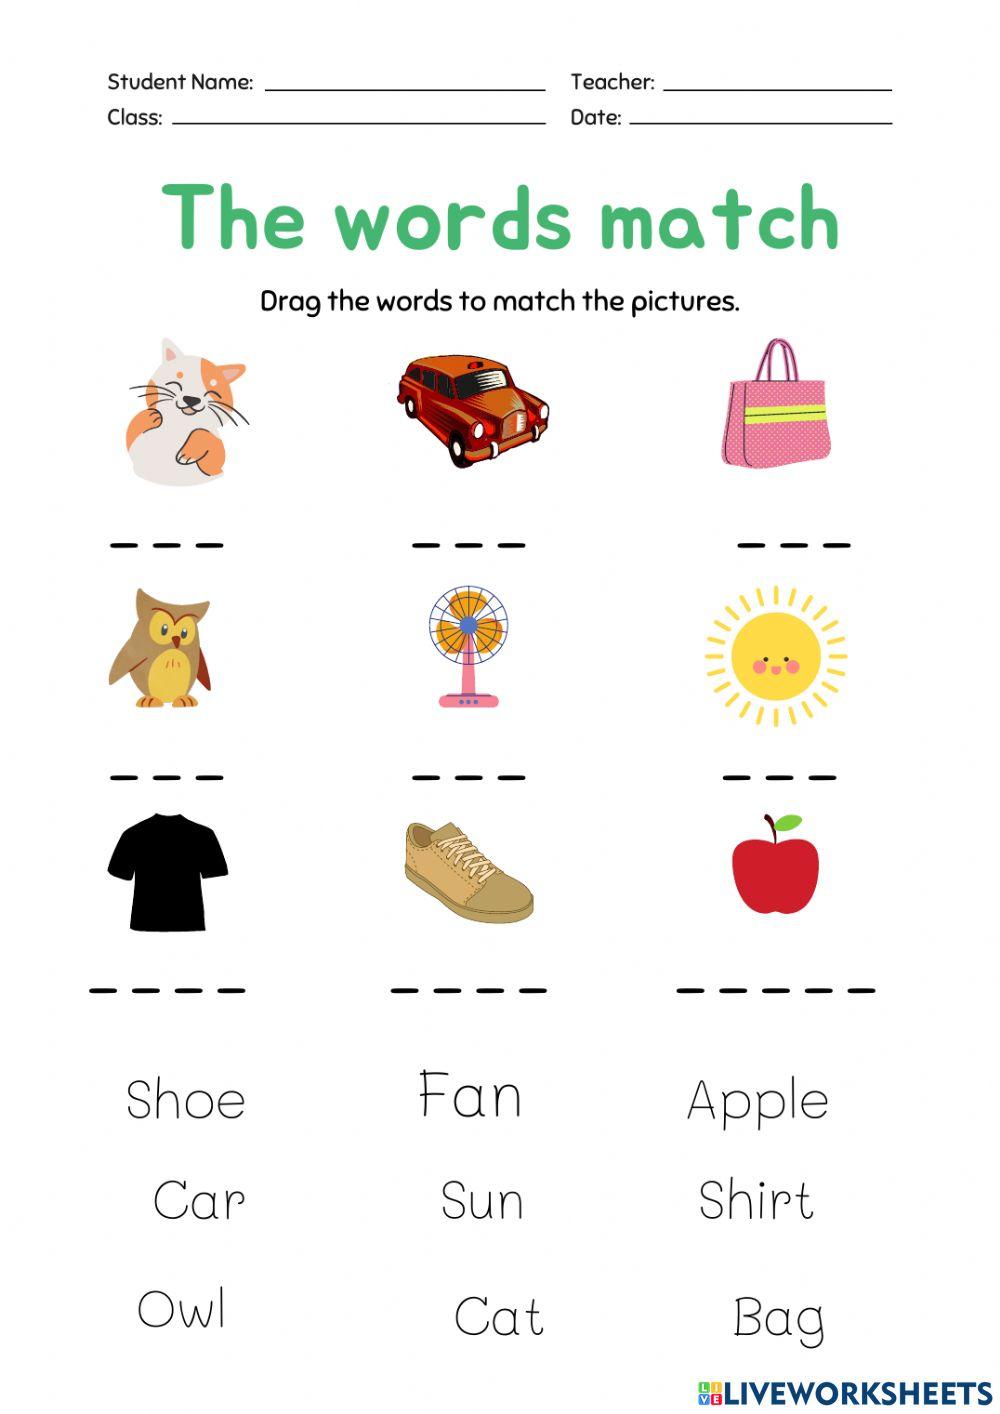 The words match